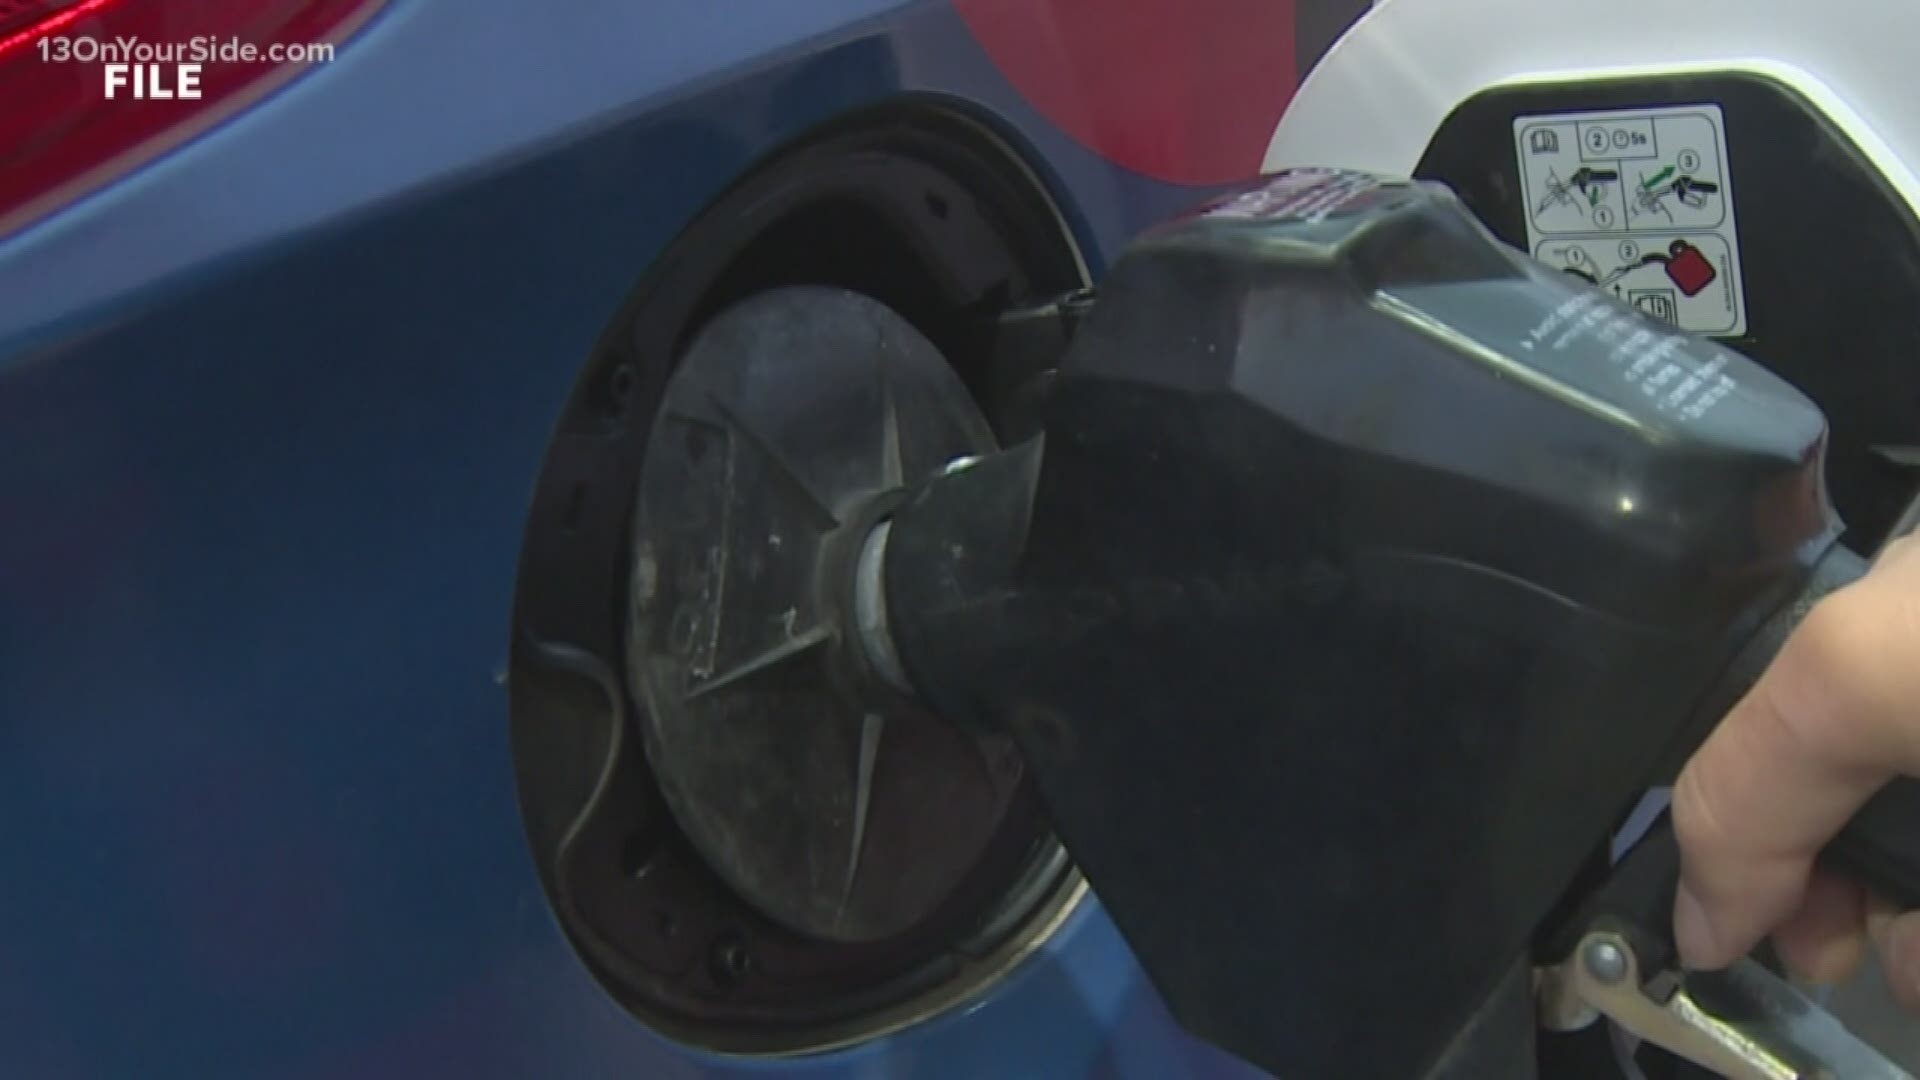 Gas prices are down a bit from last month, but as we get closer to the Fourth of July, they could shoot right back up. Gas prices will go up if gas stocks continue to dwindle, according to a AAA spokesperson -- along with the rise in demand we typically see in the summer.